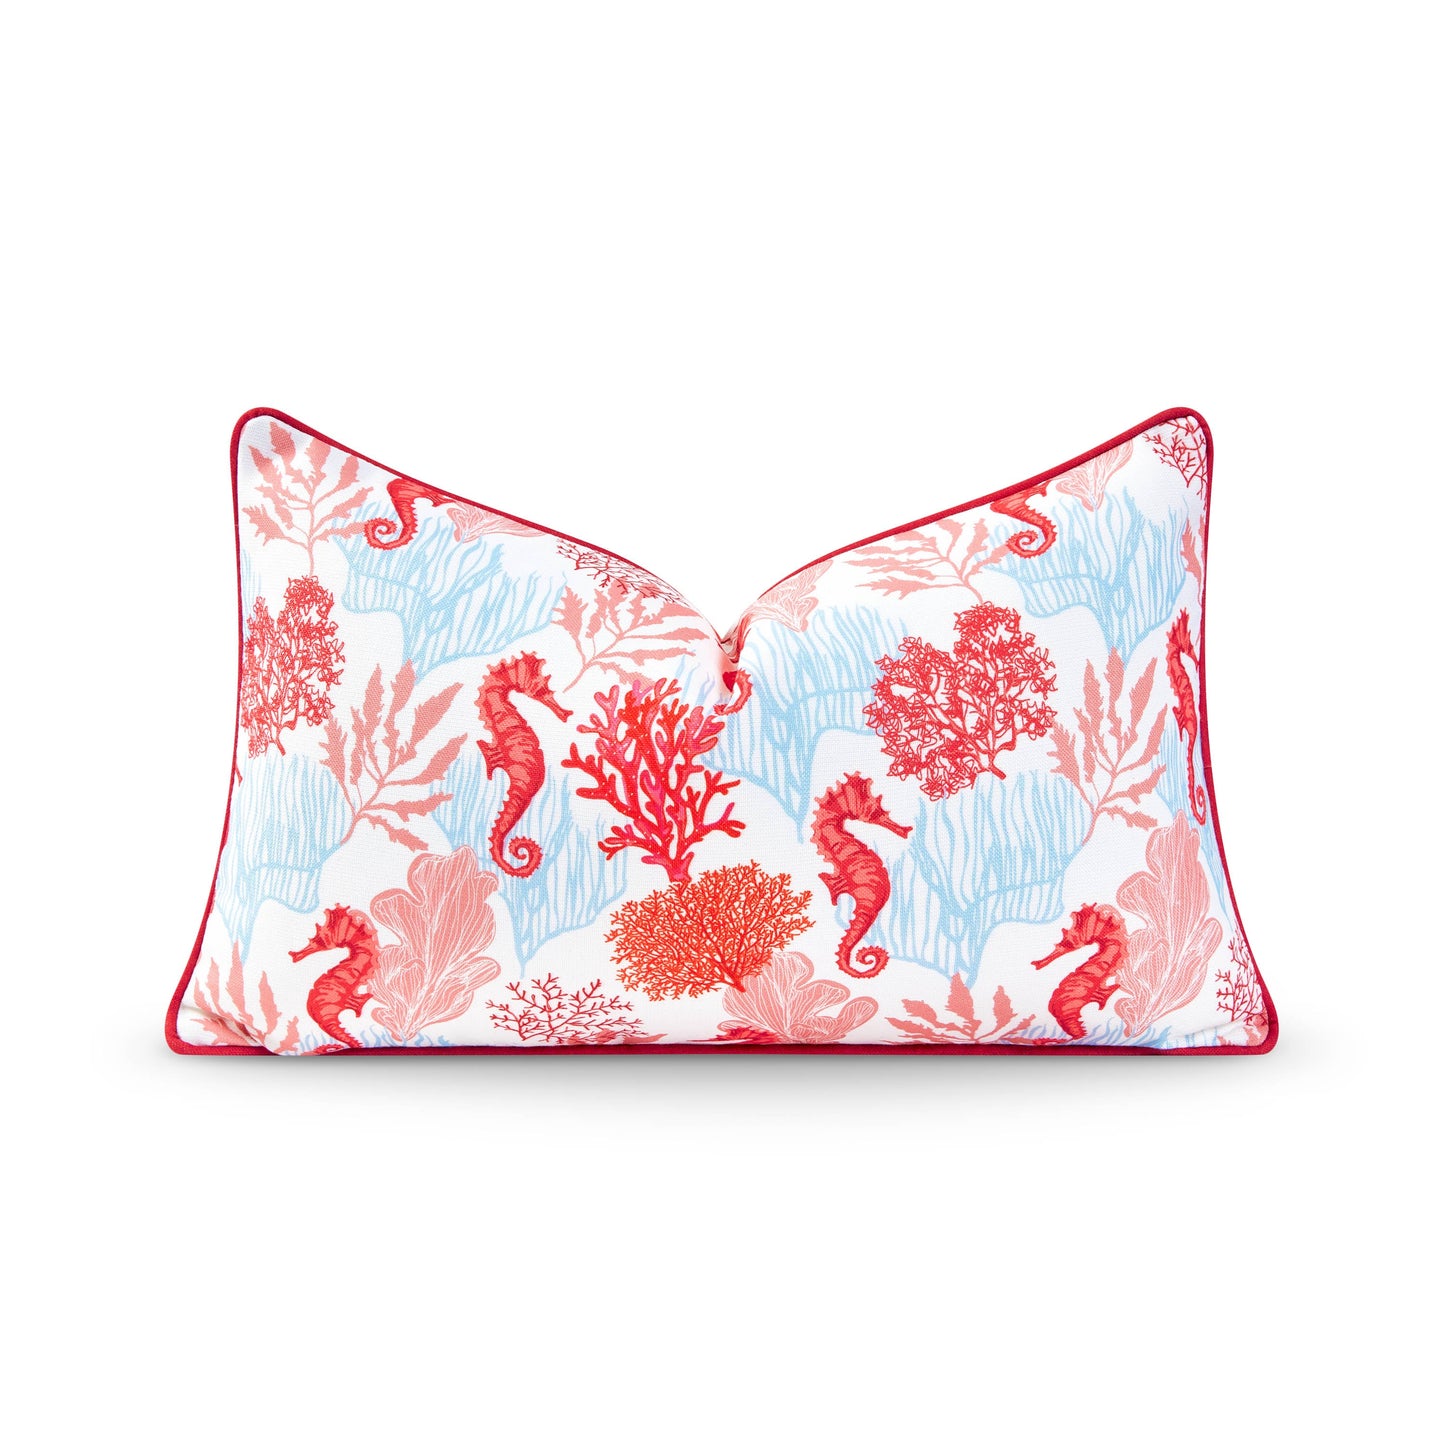 Coastal Indoor Outdoor Lumbar Pillow Cover, Coral Seahorse, Red Pink Baby Blue, 12"x20"-0